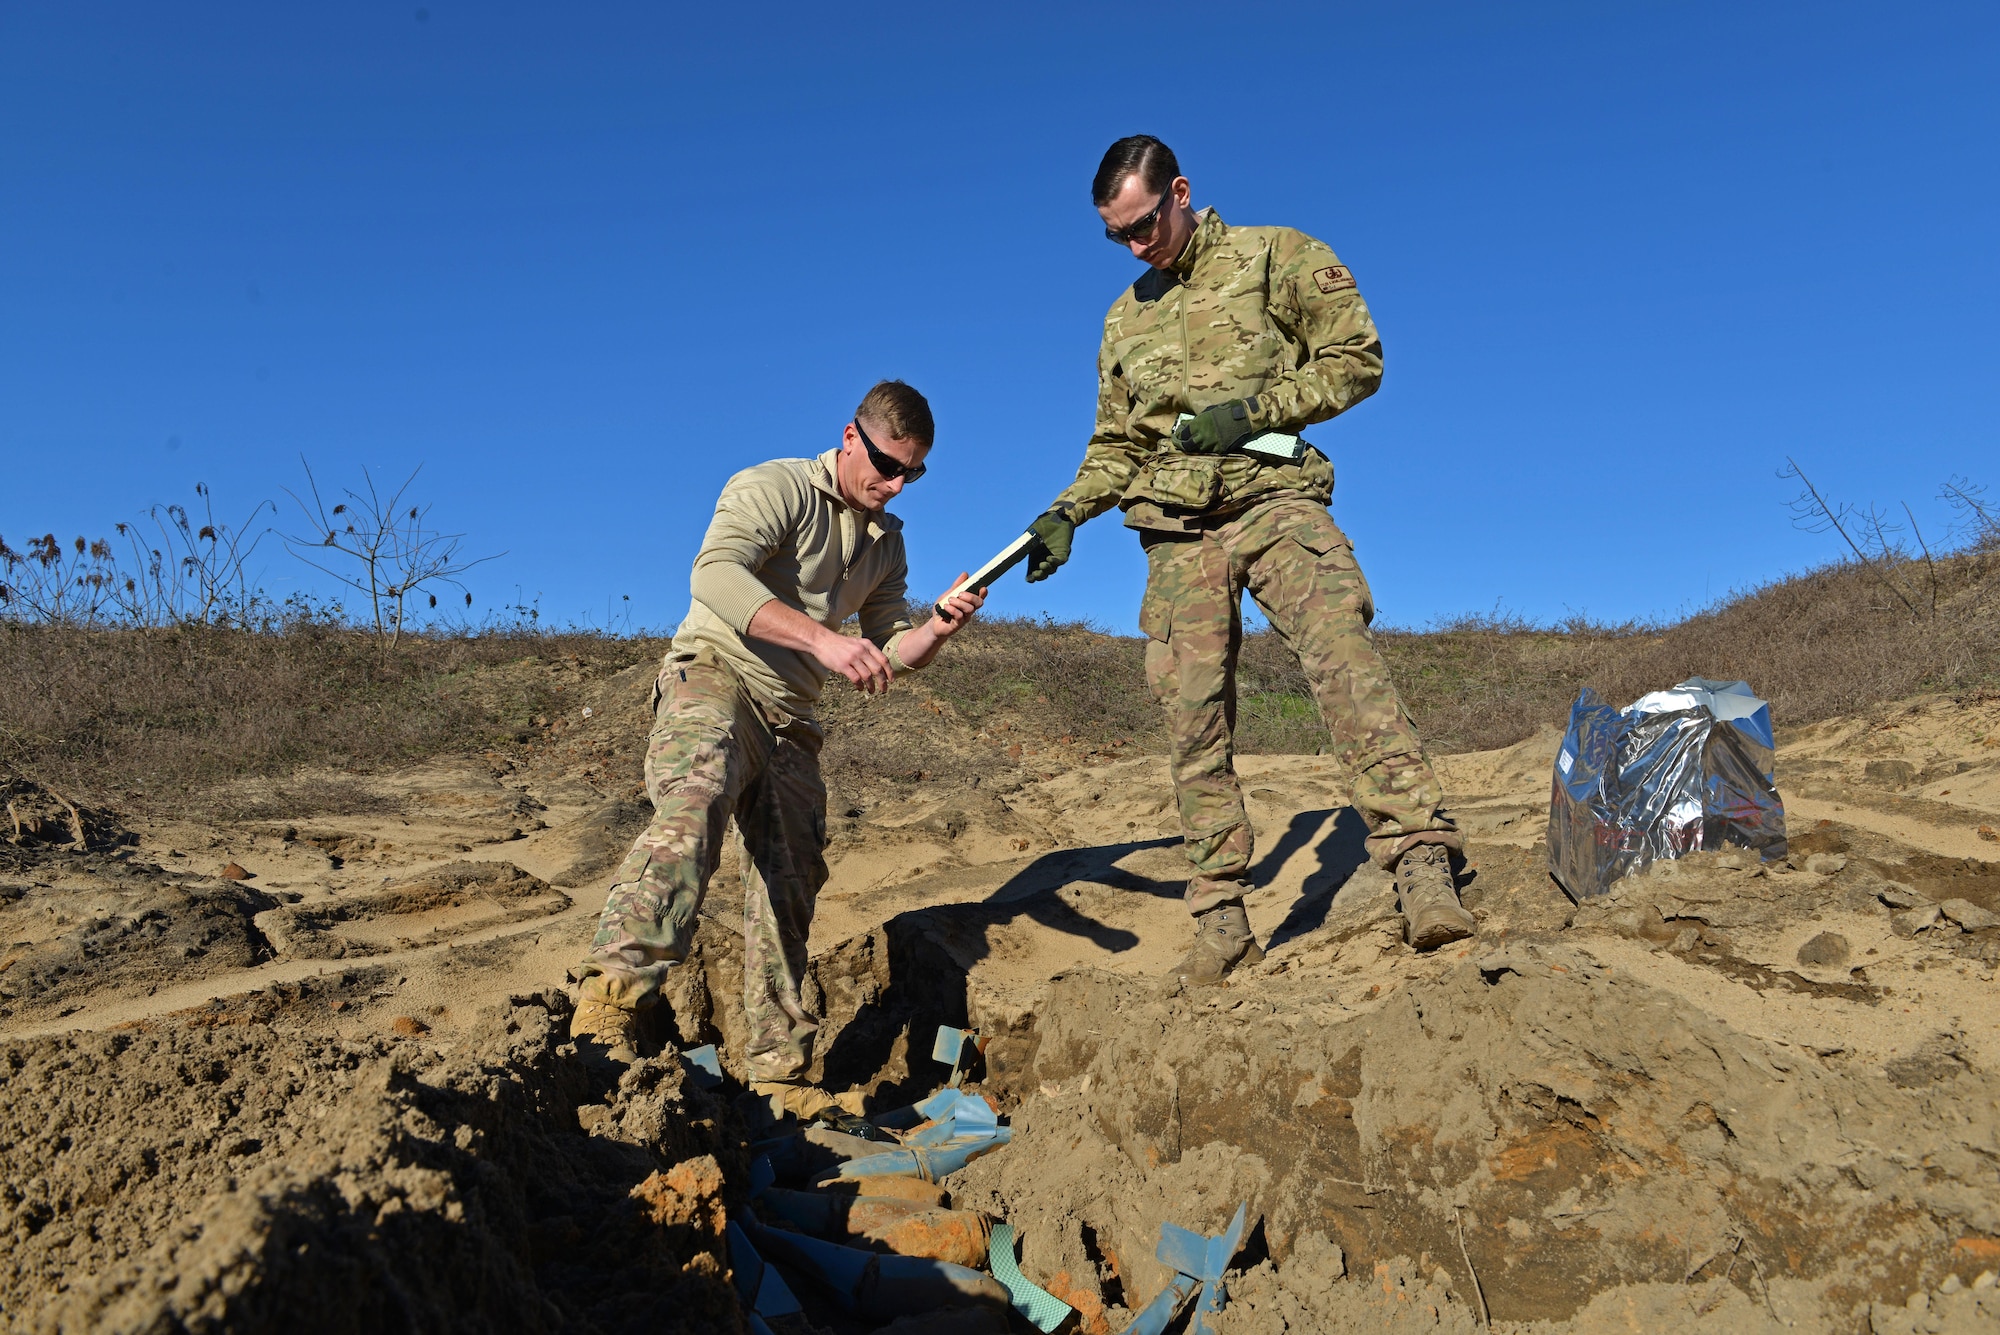 U.S. Air Force Staff Sgt. Andrew Wright, 20th Civil Engineer Squadron explosive ordnance disposal equipment section chief, left, and Senior Airman Tyler McMillan Wammack, 20th CES EOD journeyman, right, lay down C-4 explosives on top of bomb dummy unit (BDU) 33s at Poinsett Electronic Combat Range, Wedgefield, S.C., Jan. 25, 2017. The EOD Airmen used approximately 75 pounds of C-4 to destroy BDU munitions, which are training munitions used by 20th Fighter Wing pilots to maintain readiness. (U.S. Air Force photo by Airman 1st Class Destinee Sweeney)